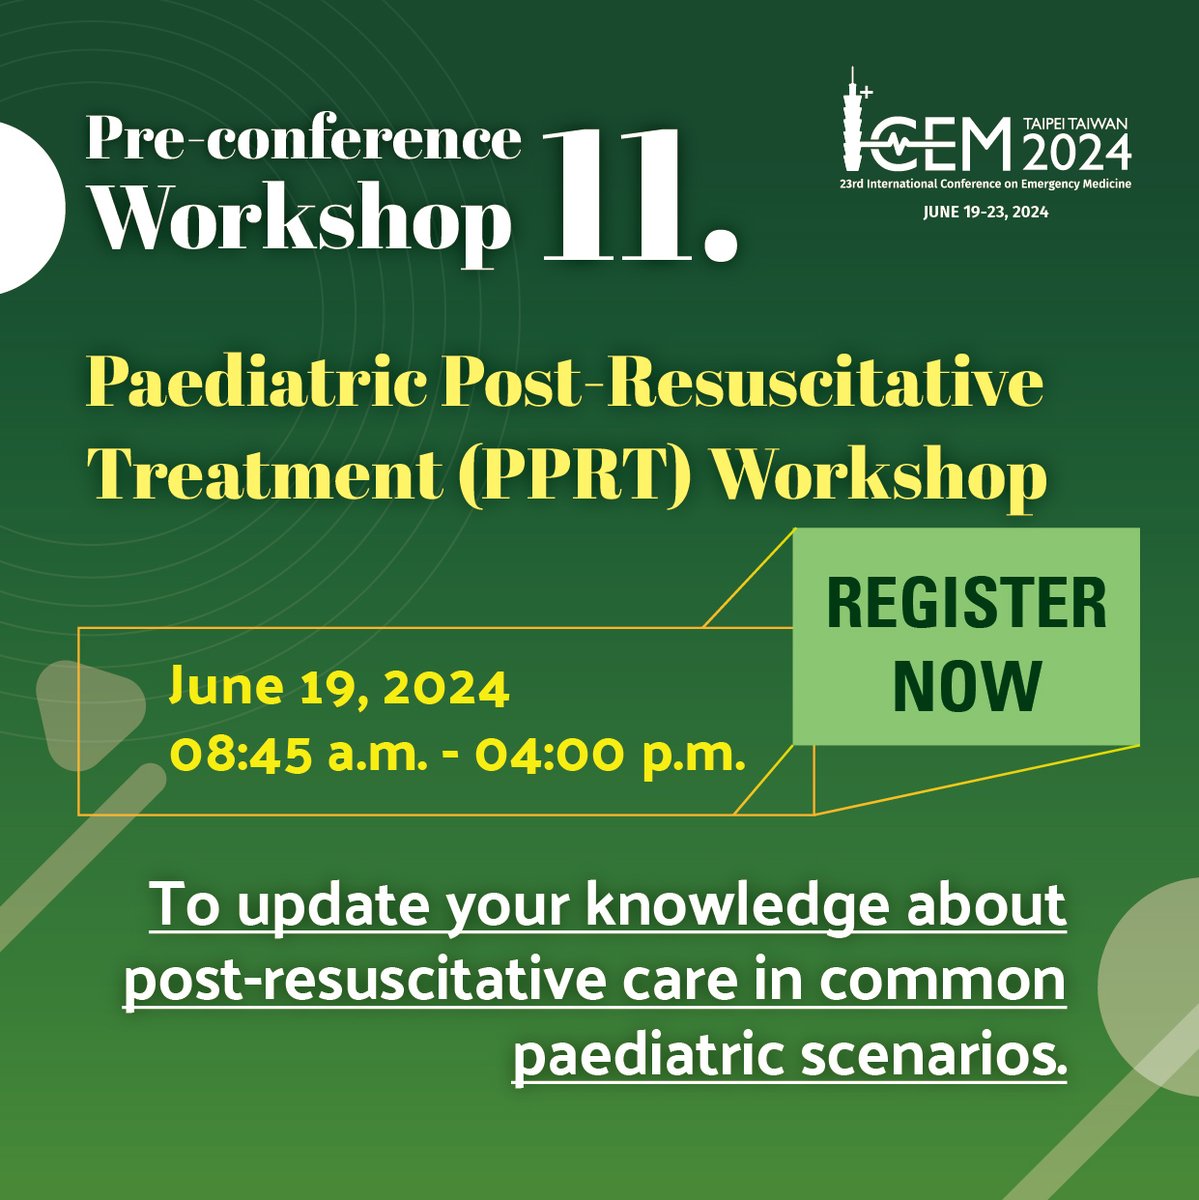 Calling all emergency medicine professionals! Elevate your skills with our preconference workshops designed to sharpen your clinical expertise and enhance patient care. Learn more and register: icem2024.com/pre-conference